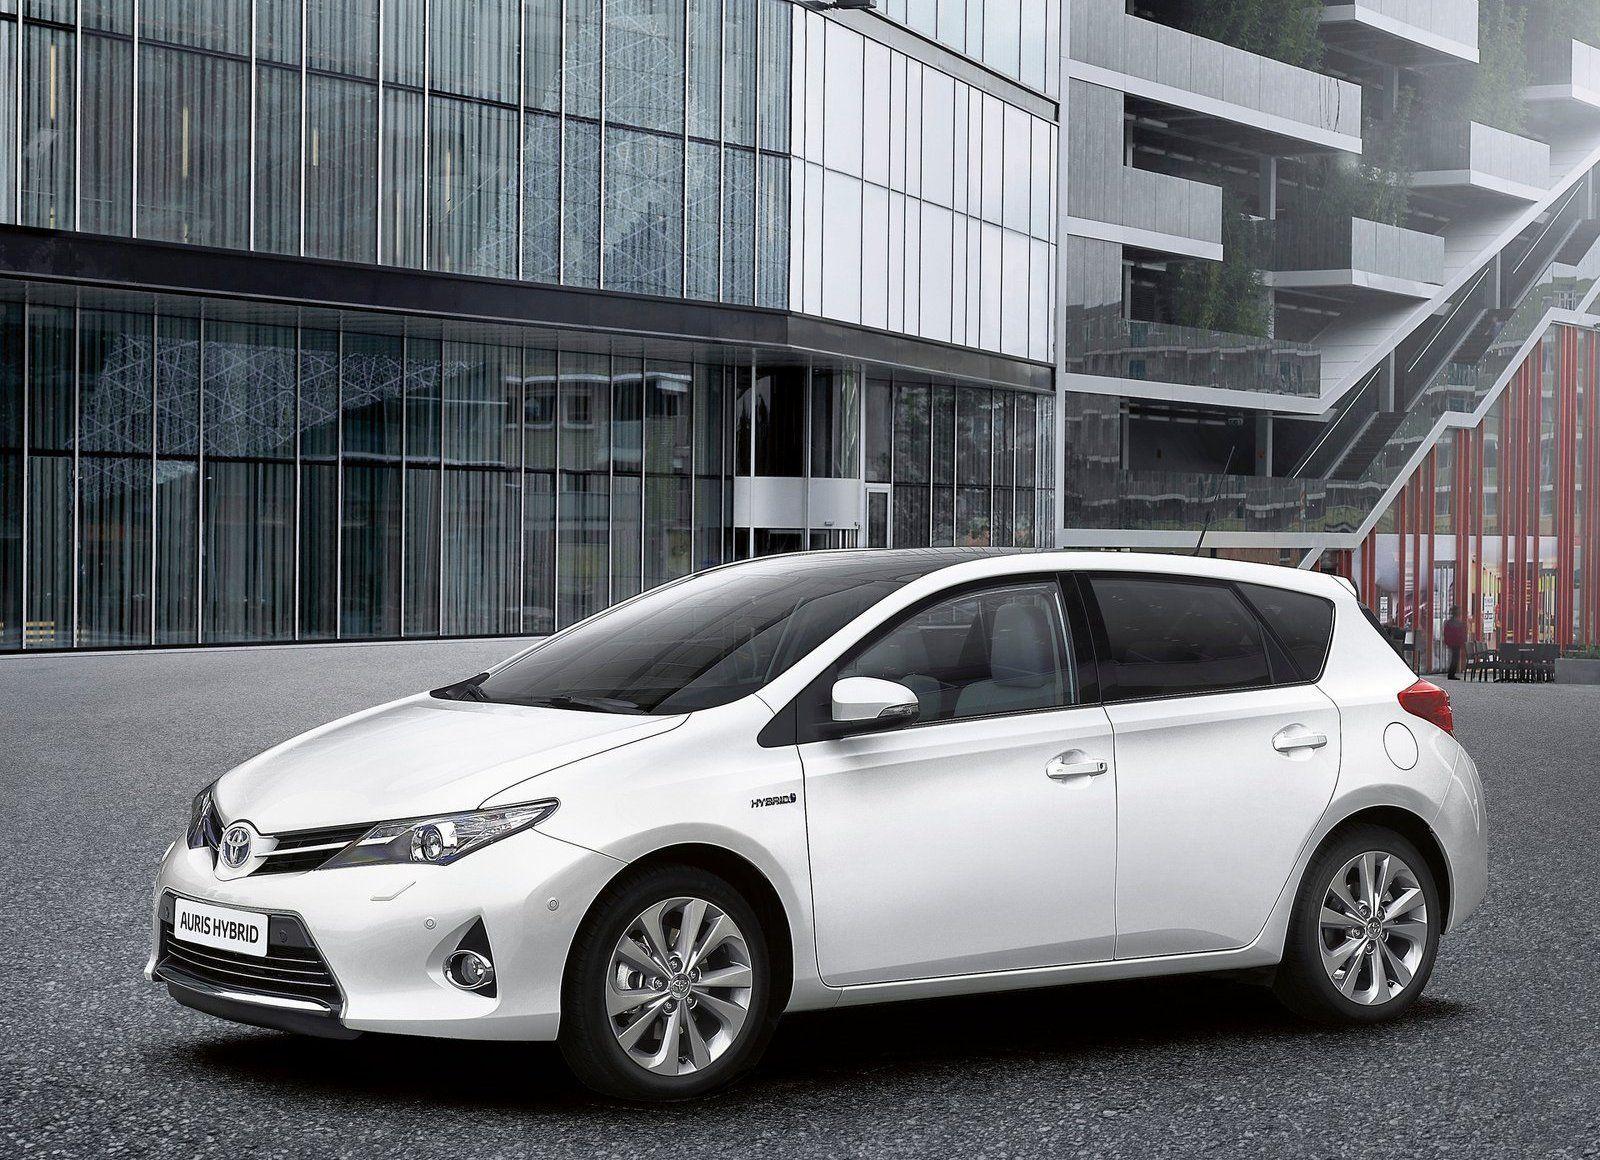 Free Download Wallpapers Toyota Auris Walpaper Download free